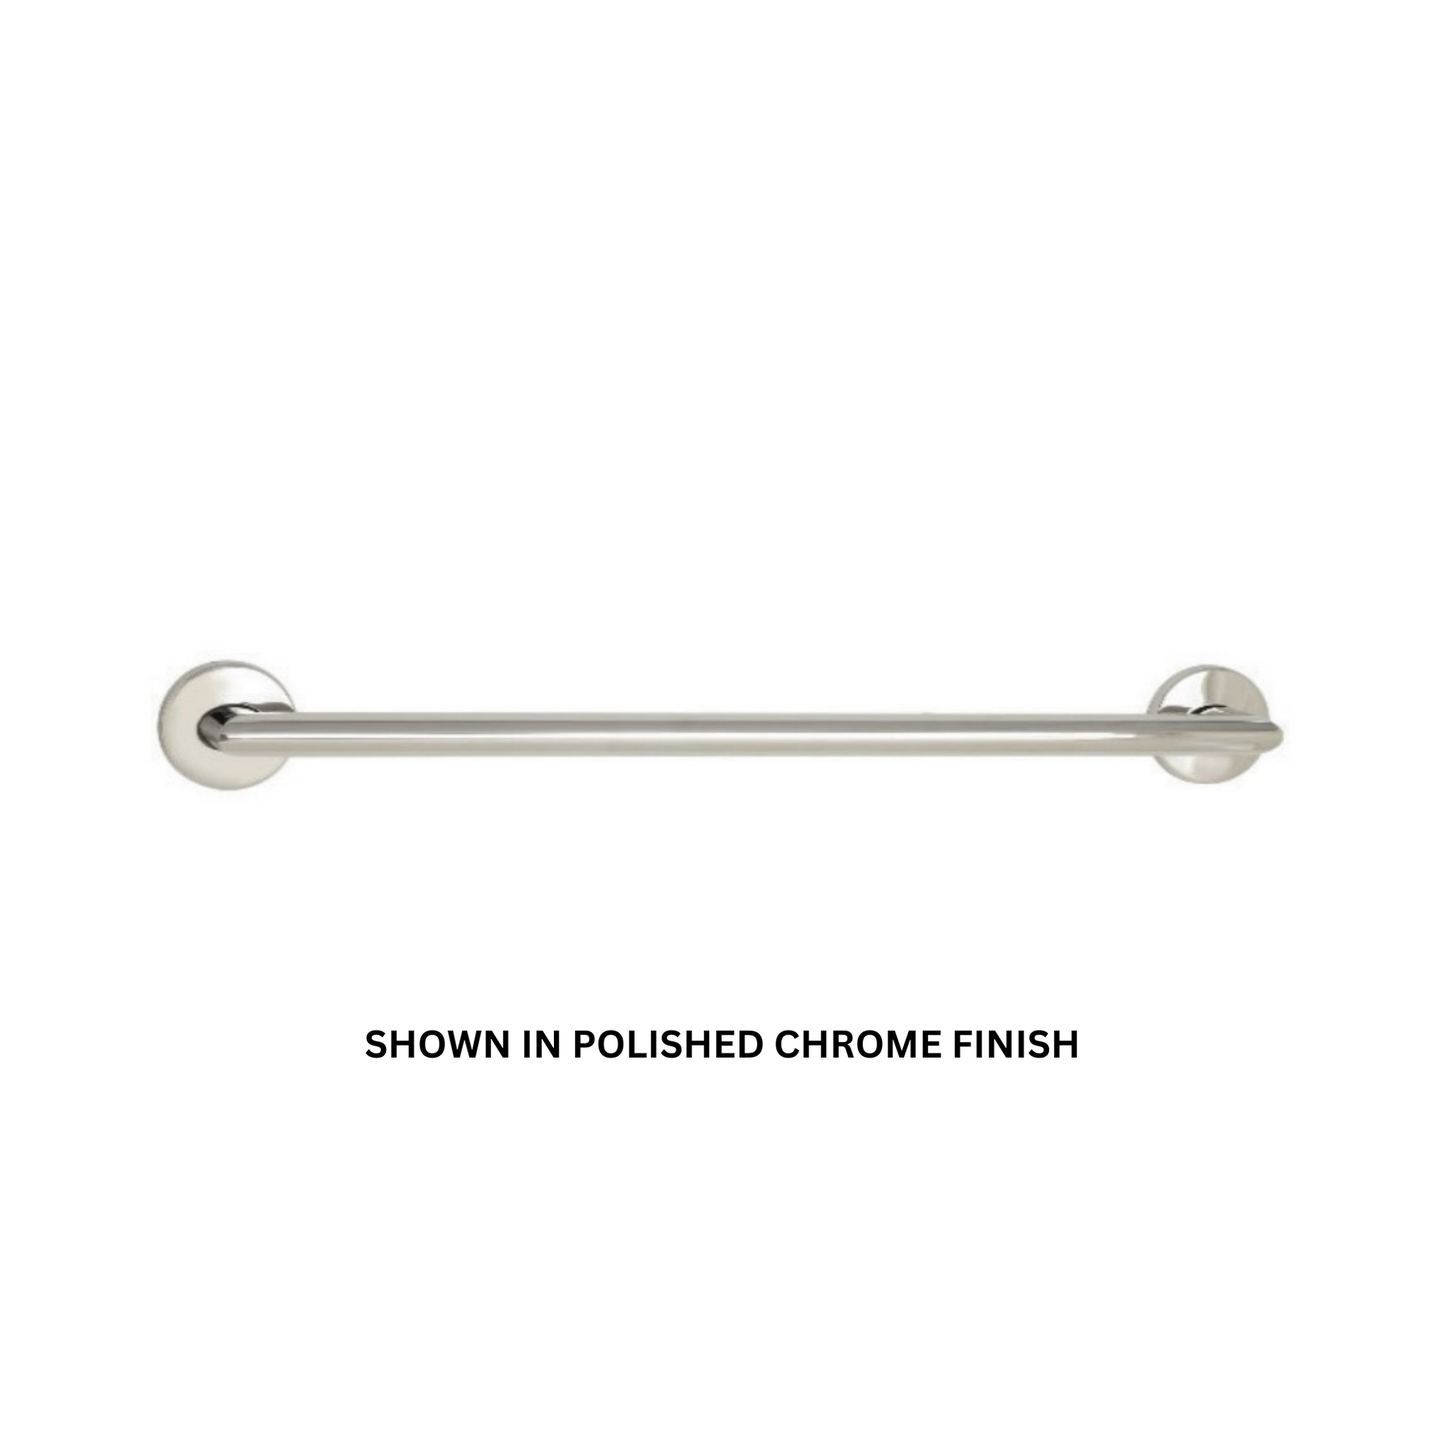 Seachrome Coronado 12" Almond Wrinkle Powder Coat 1.5" Concealed Flanges Oval Grab Bar With Mitered Corners